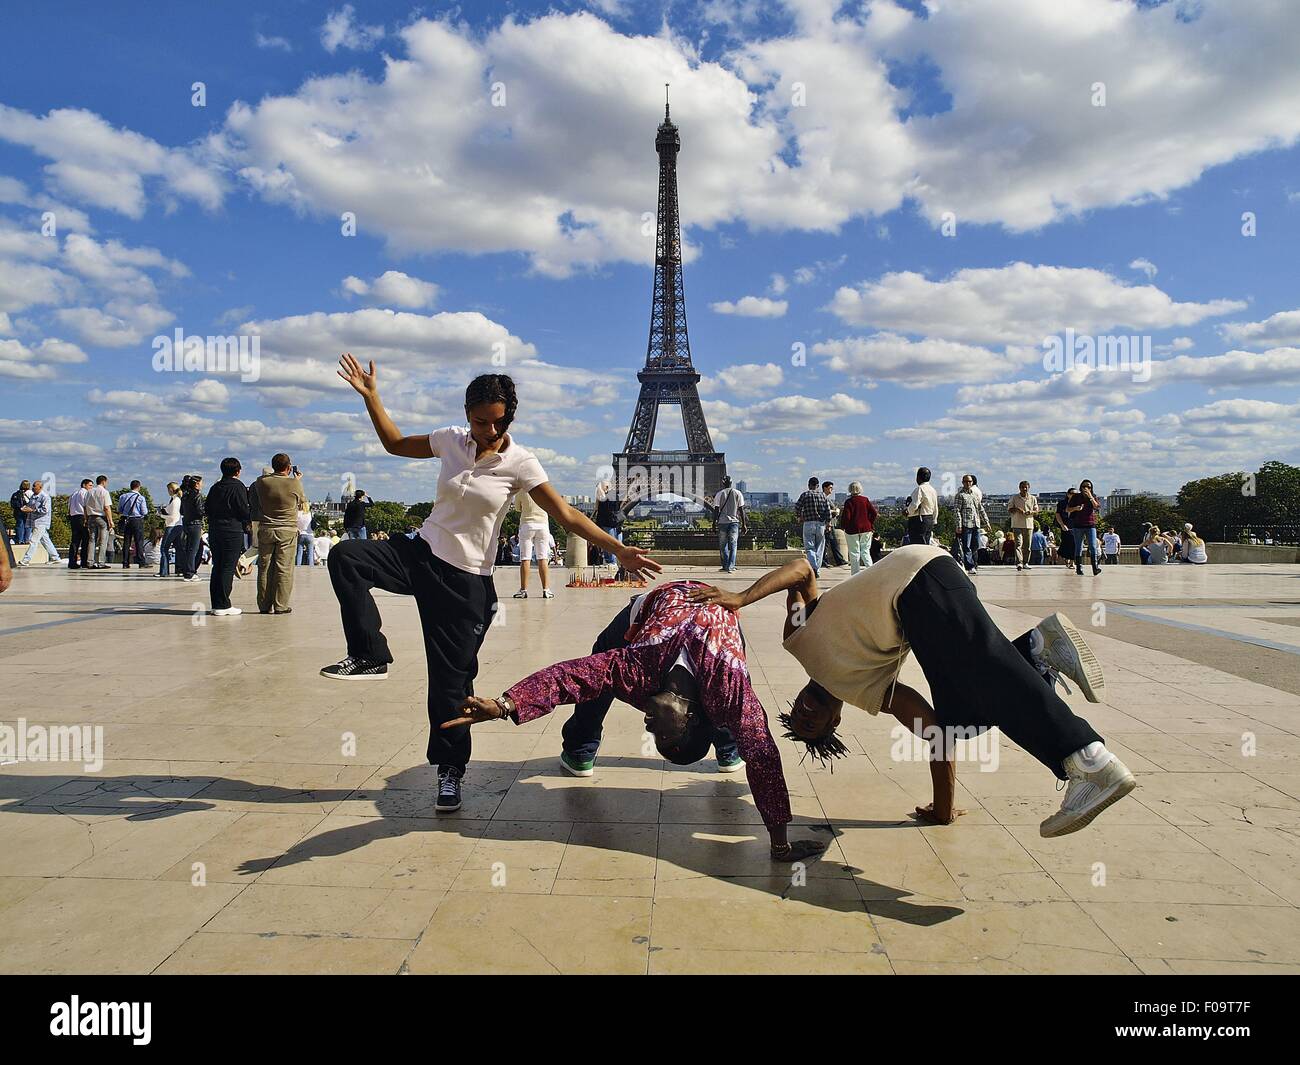 Dancers performing in front of Eiffel Tower, Paris, France Stock Photo